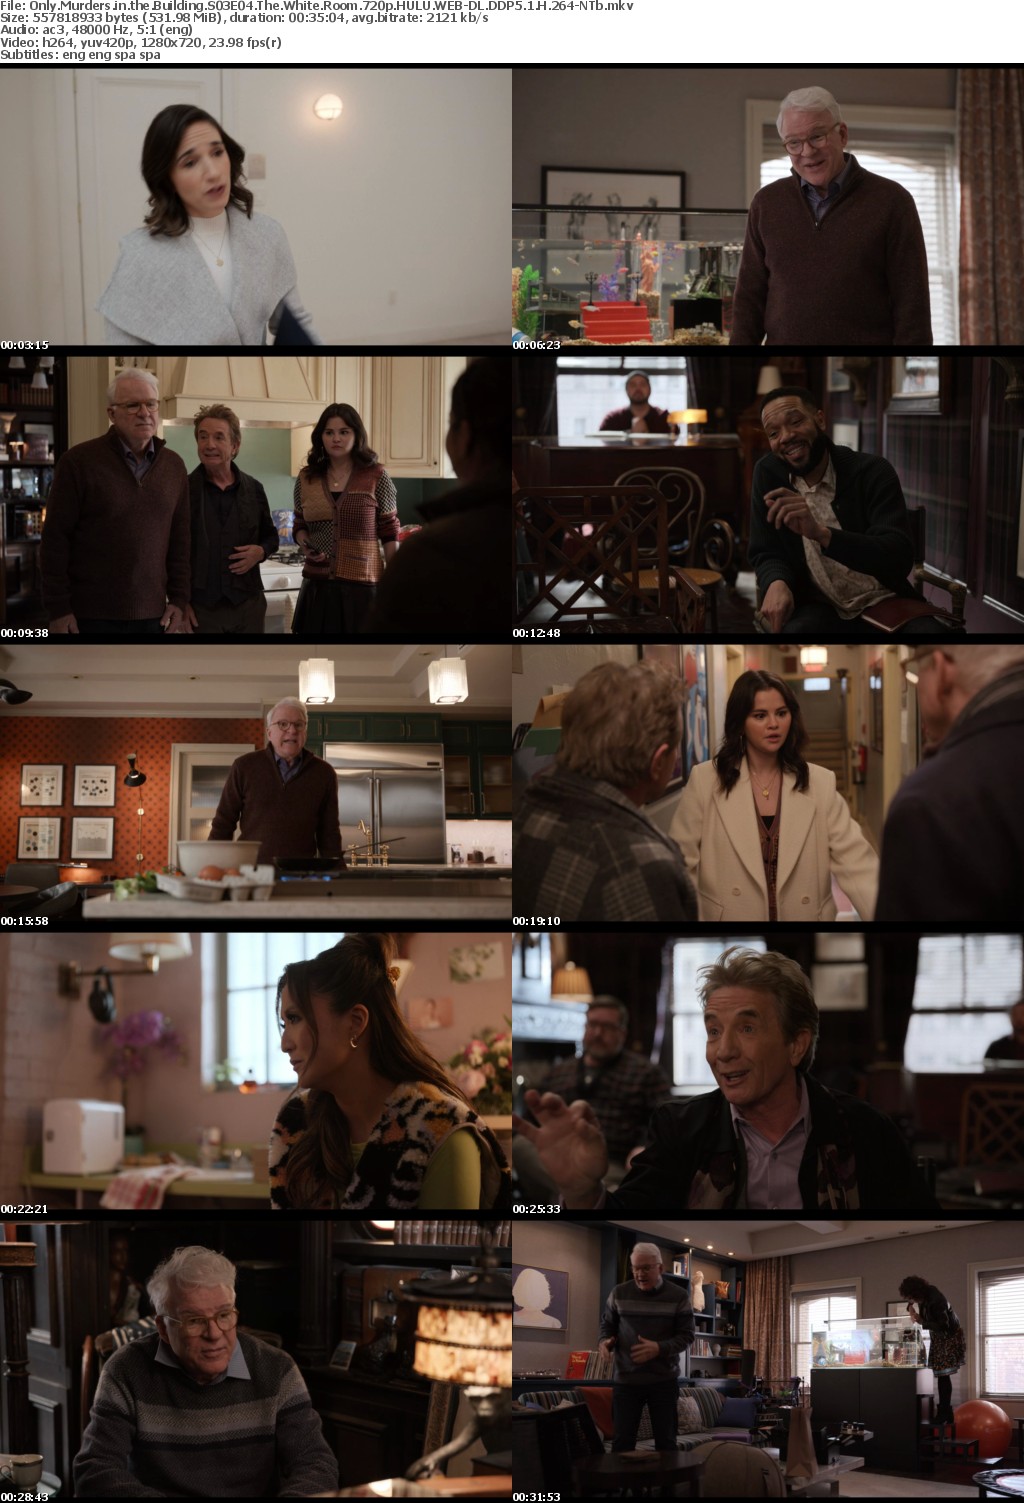 Only Murders in the Building S03E04 The White Room 720p HULU WEB-DL DDP5 1 H 264-NTb